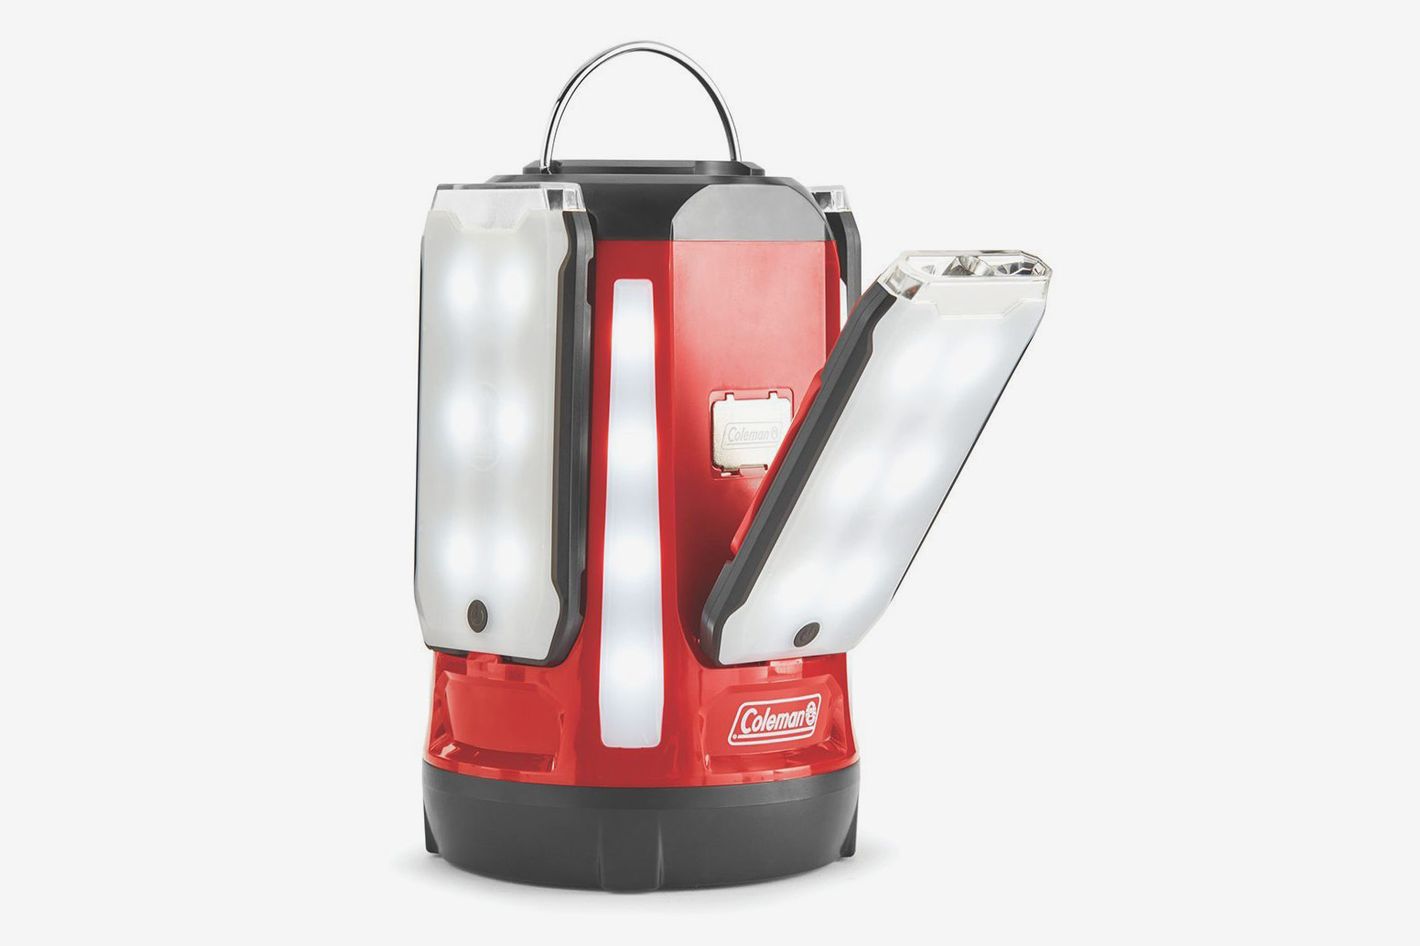 The 11 Best Camping Lanterns